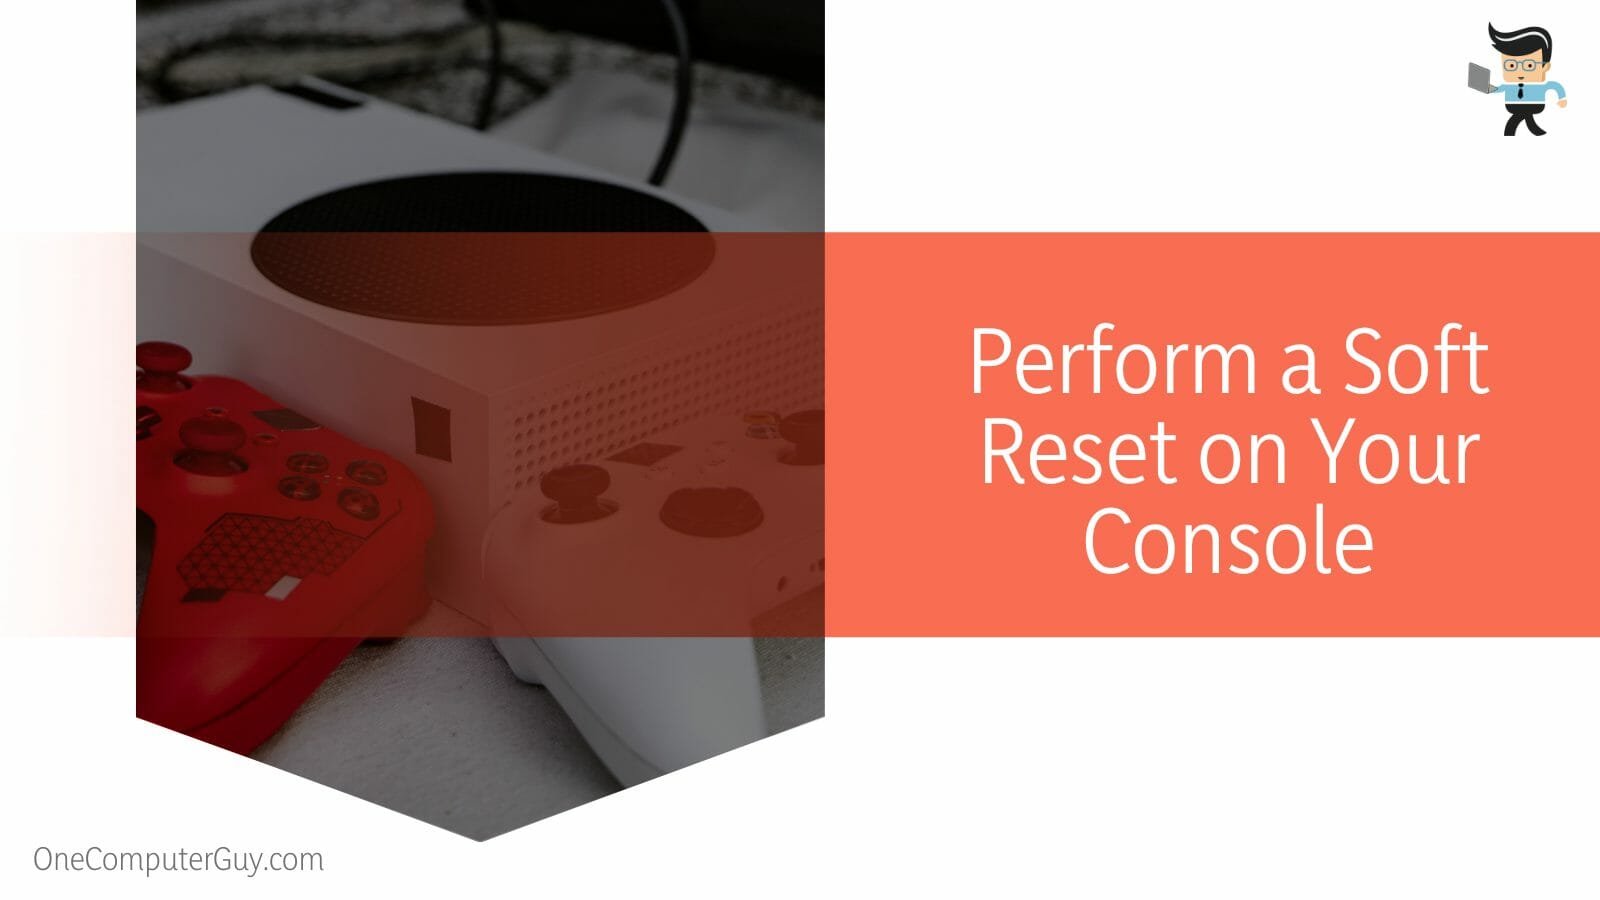 Perform a Soft Reset on Your Console